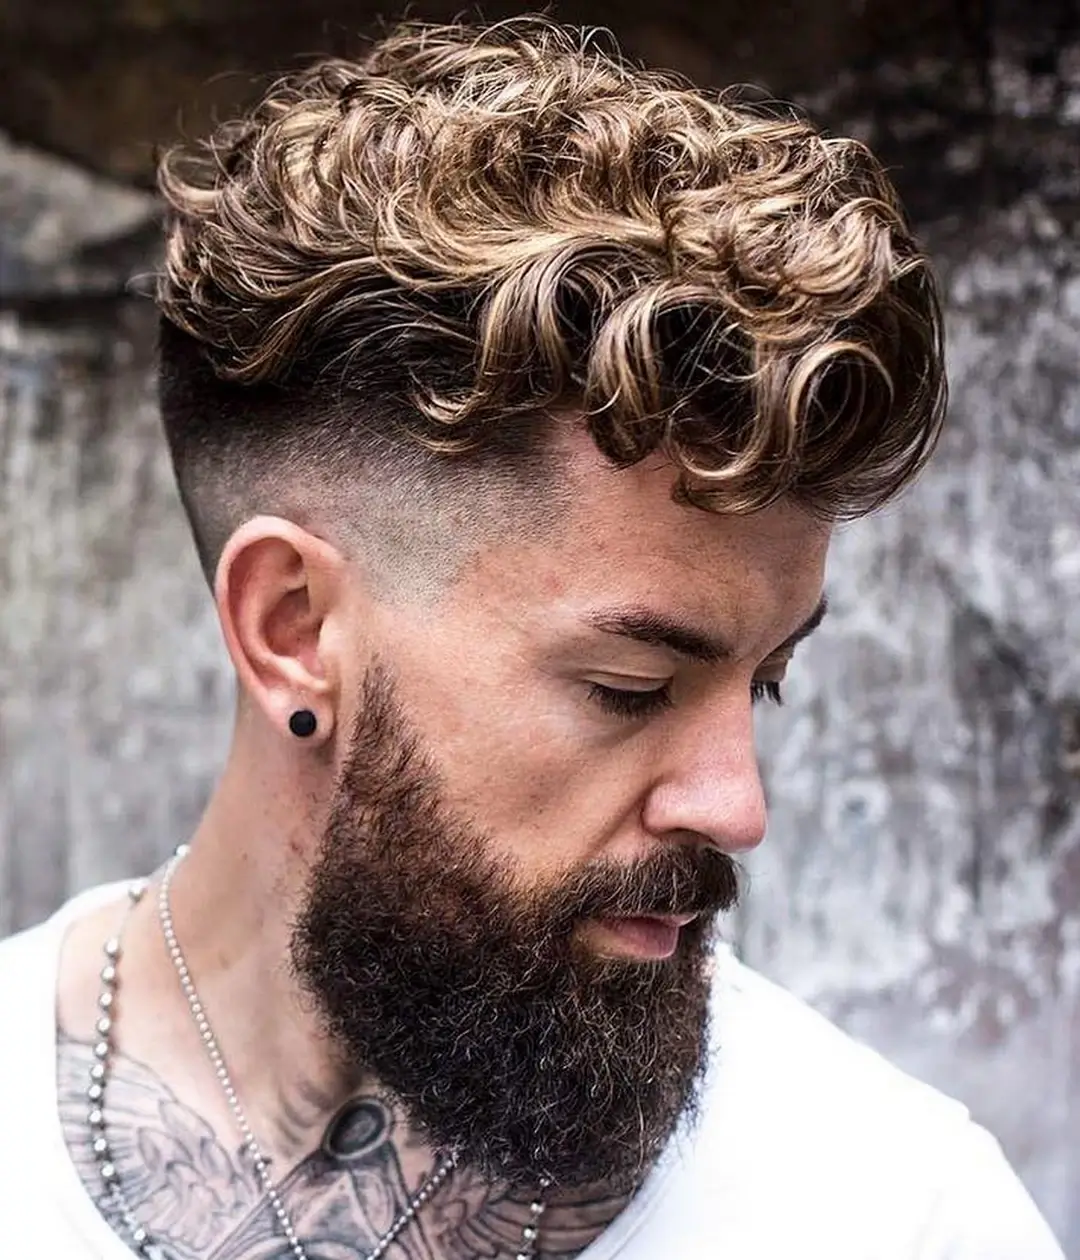 Men's Curly Undercut from Fifth Ave Barber Shop in Midtown NYC